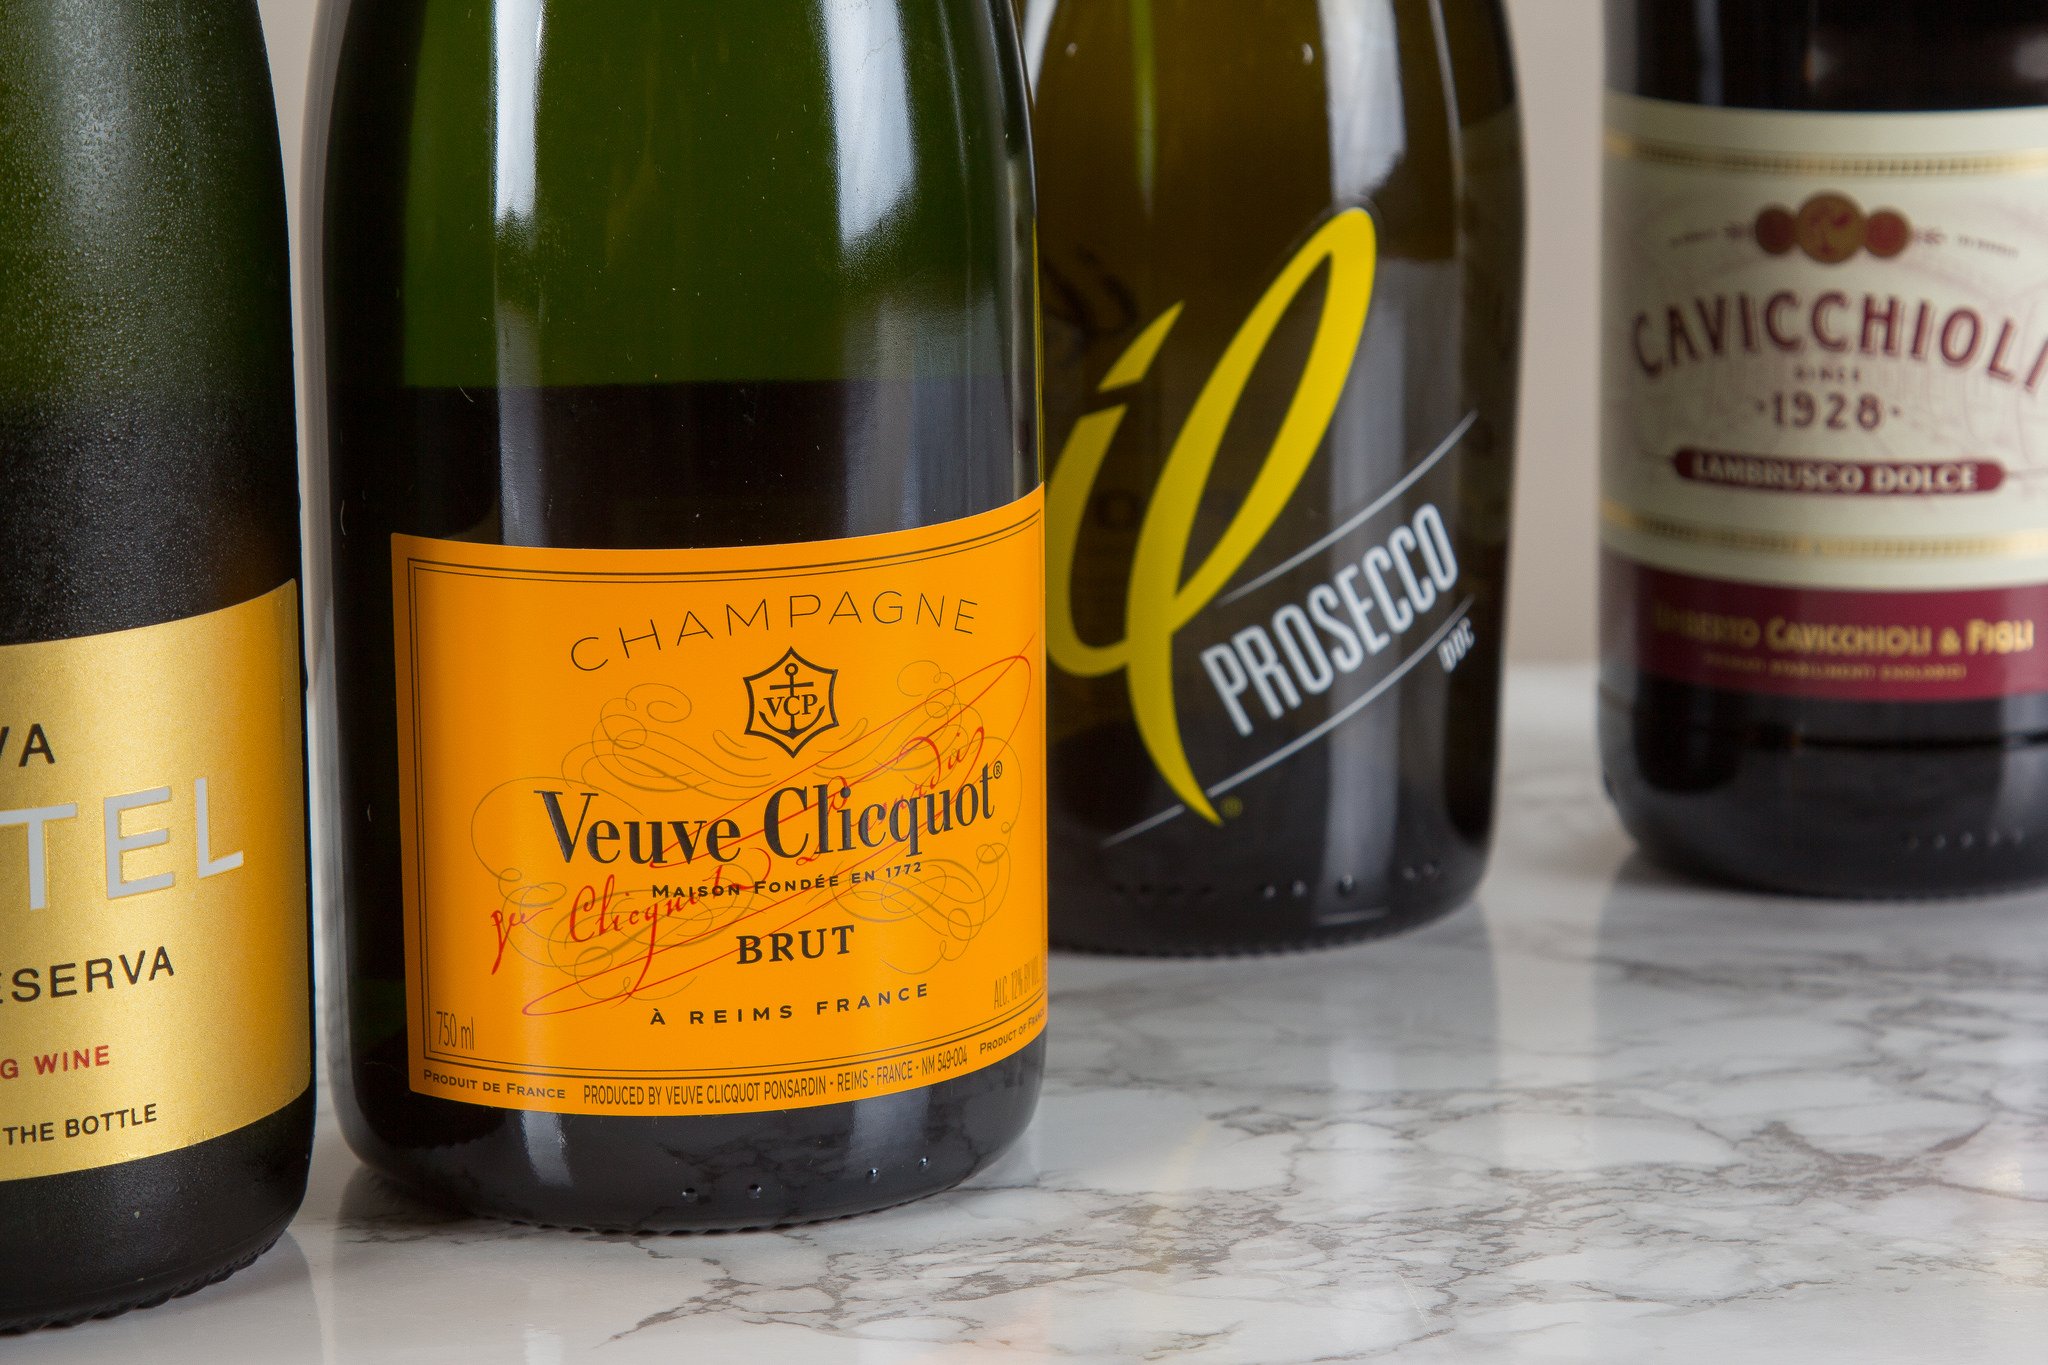 A Guide To Choosing The Right Champagne According To What's On The Label 